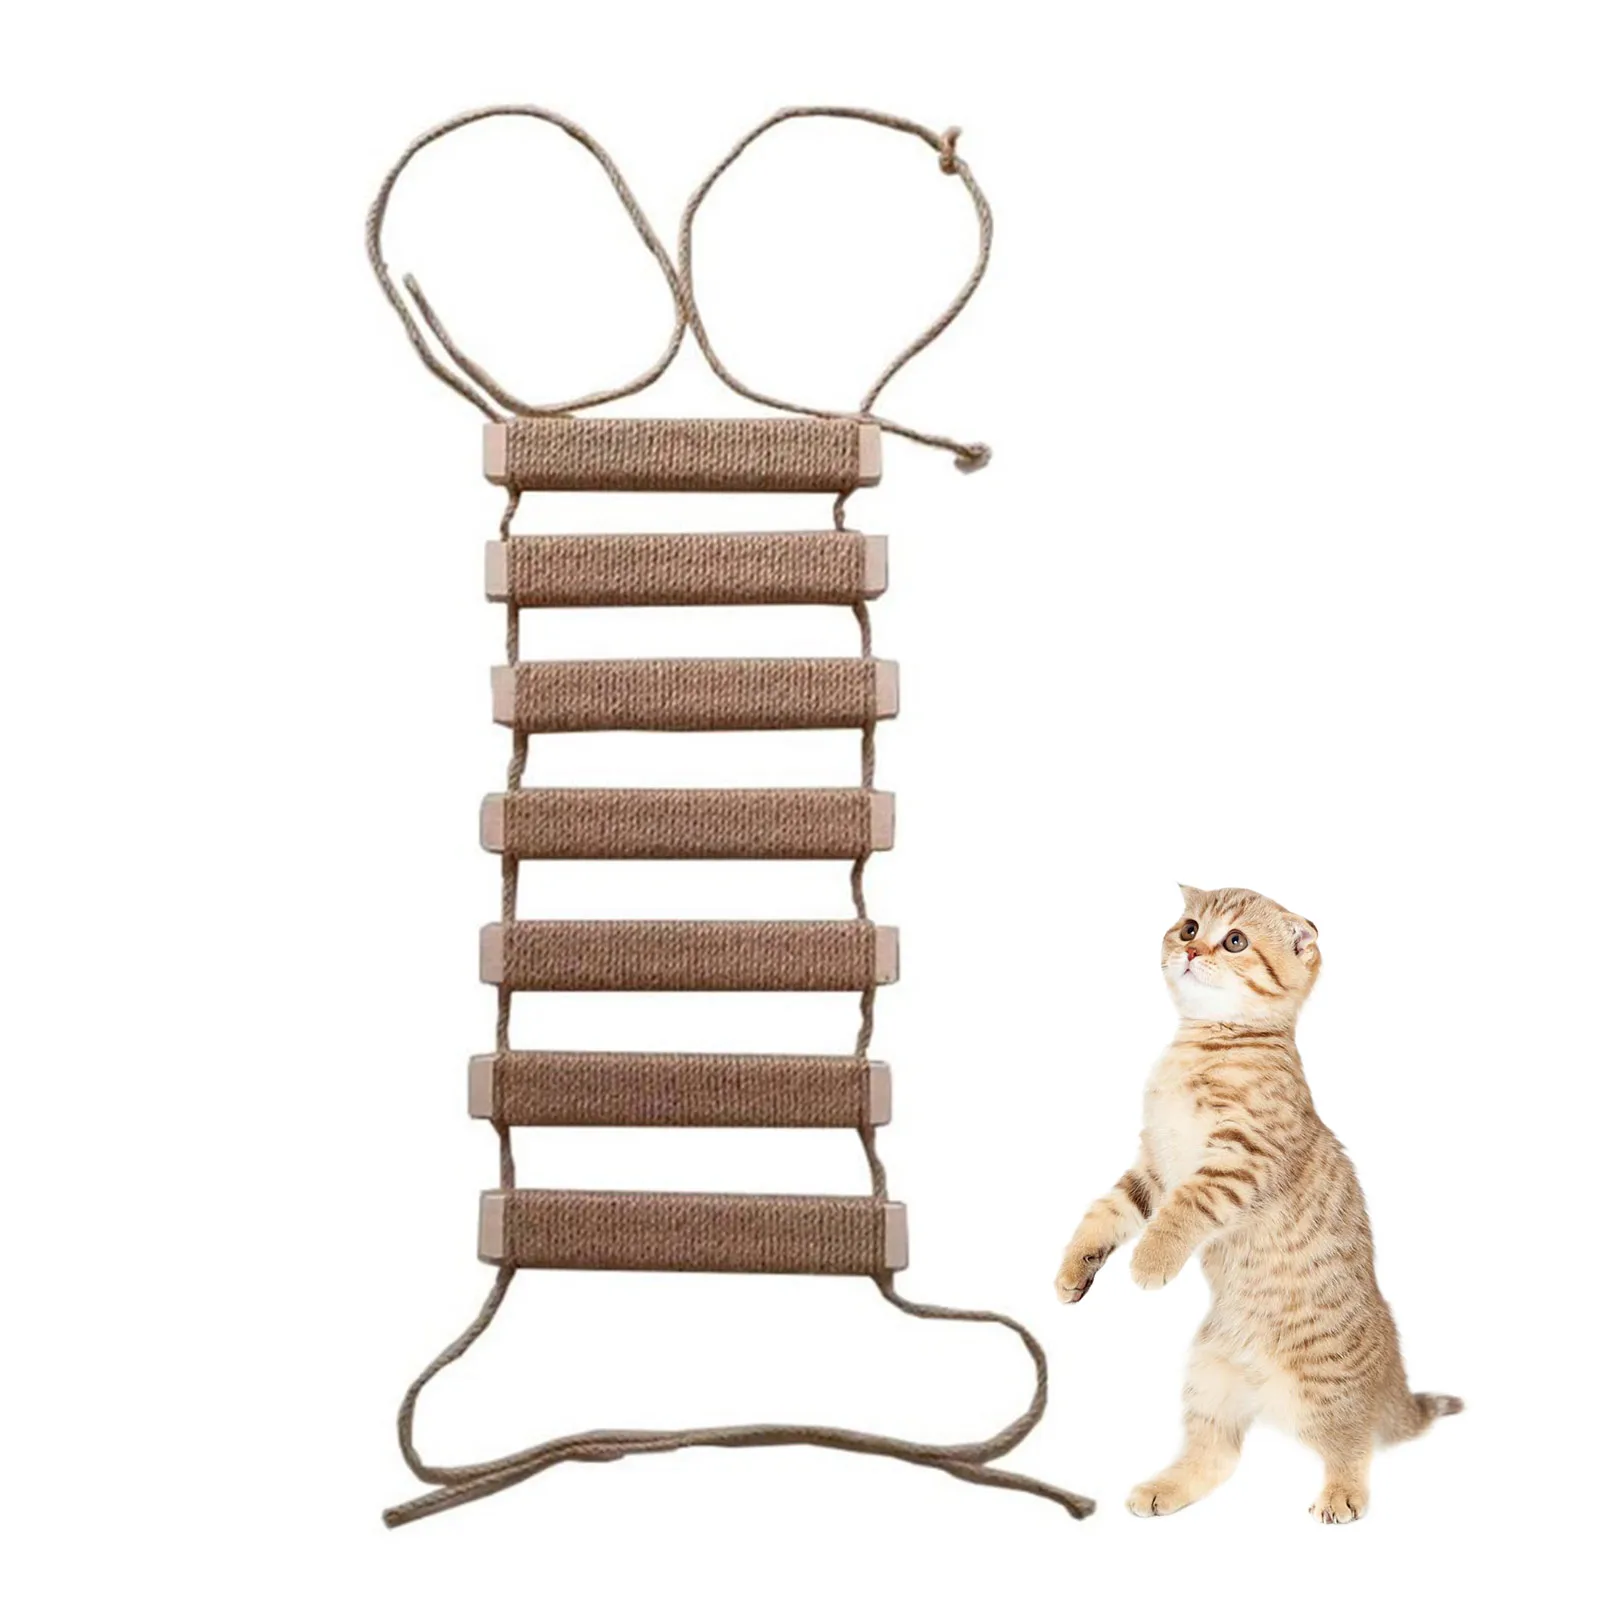 

Rope Cat Bridge Suspension Bridge For Cats Wall Climbing Wood Climbing Frame For Cat Cat Supplies For Home Use